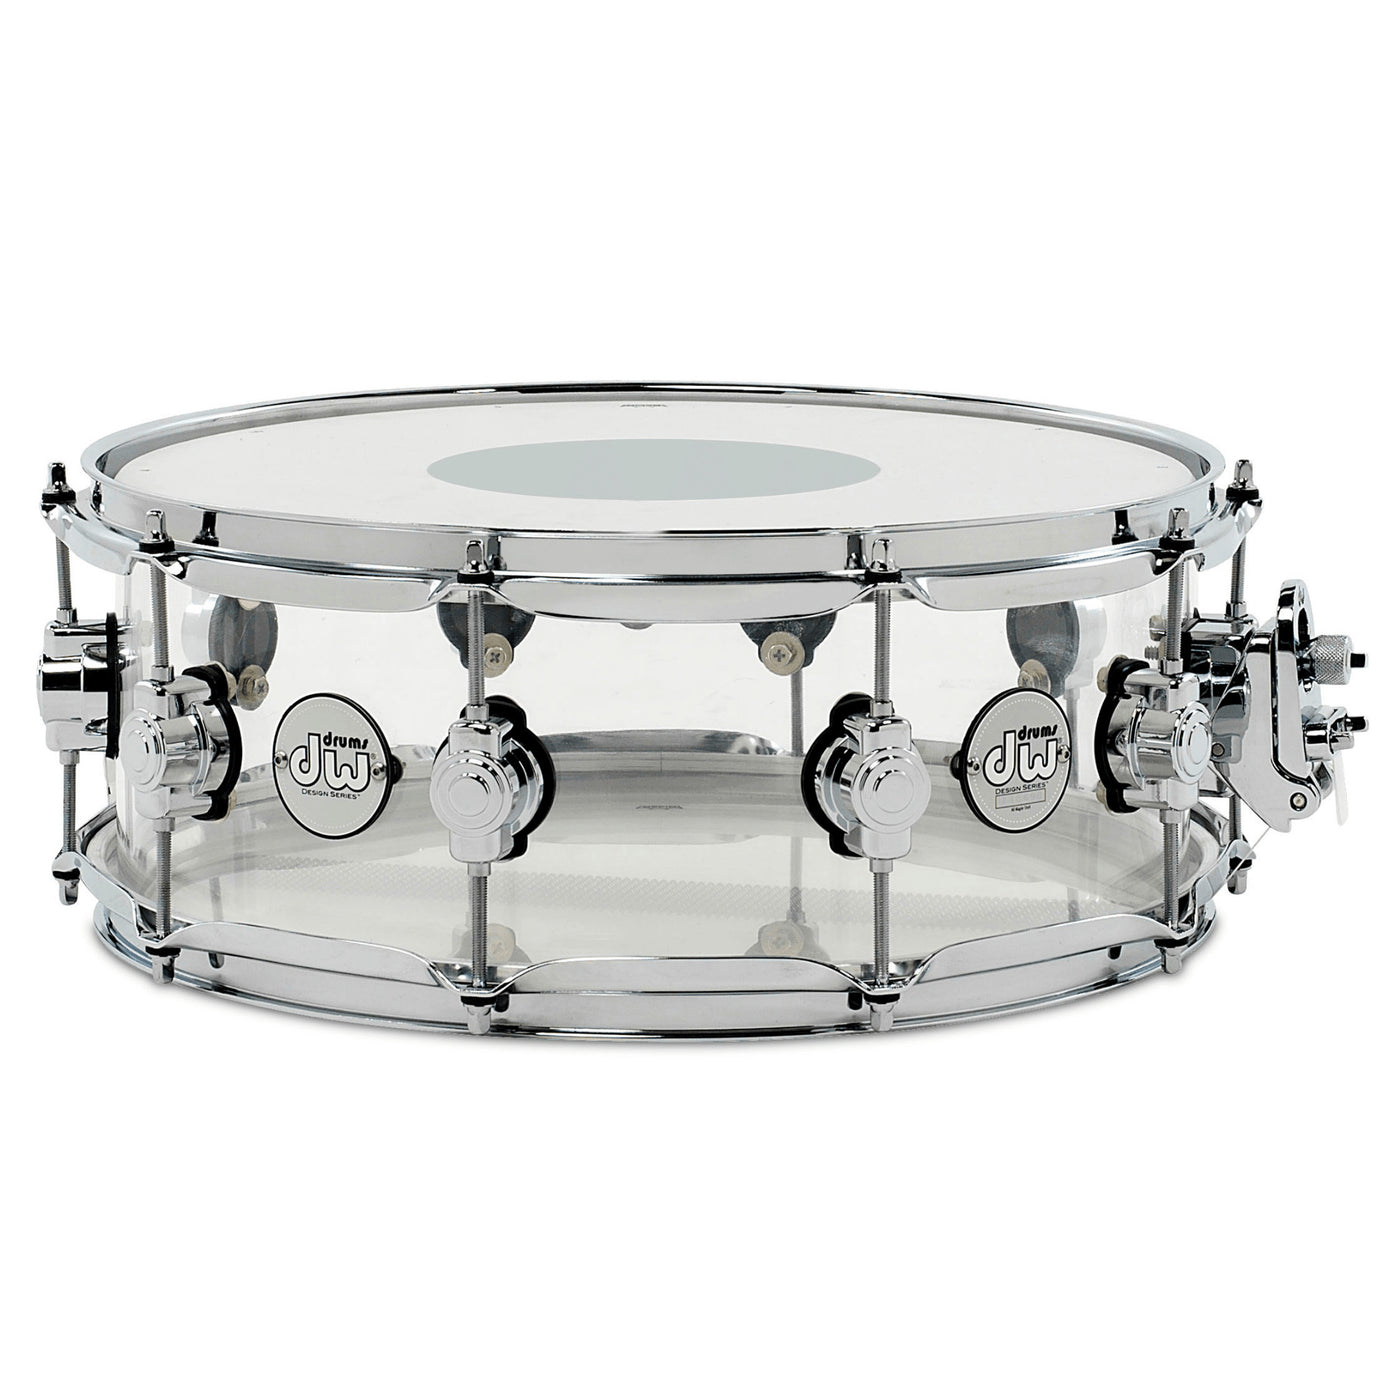 DW Design Series 5.5x14" Snare Drum - Clear Acrylic